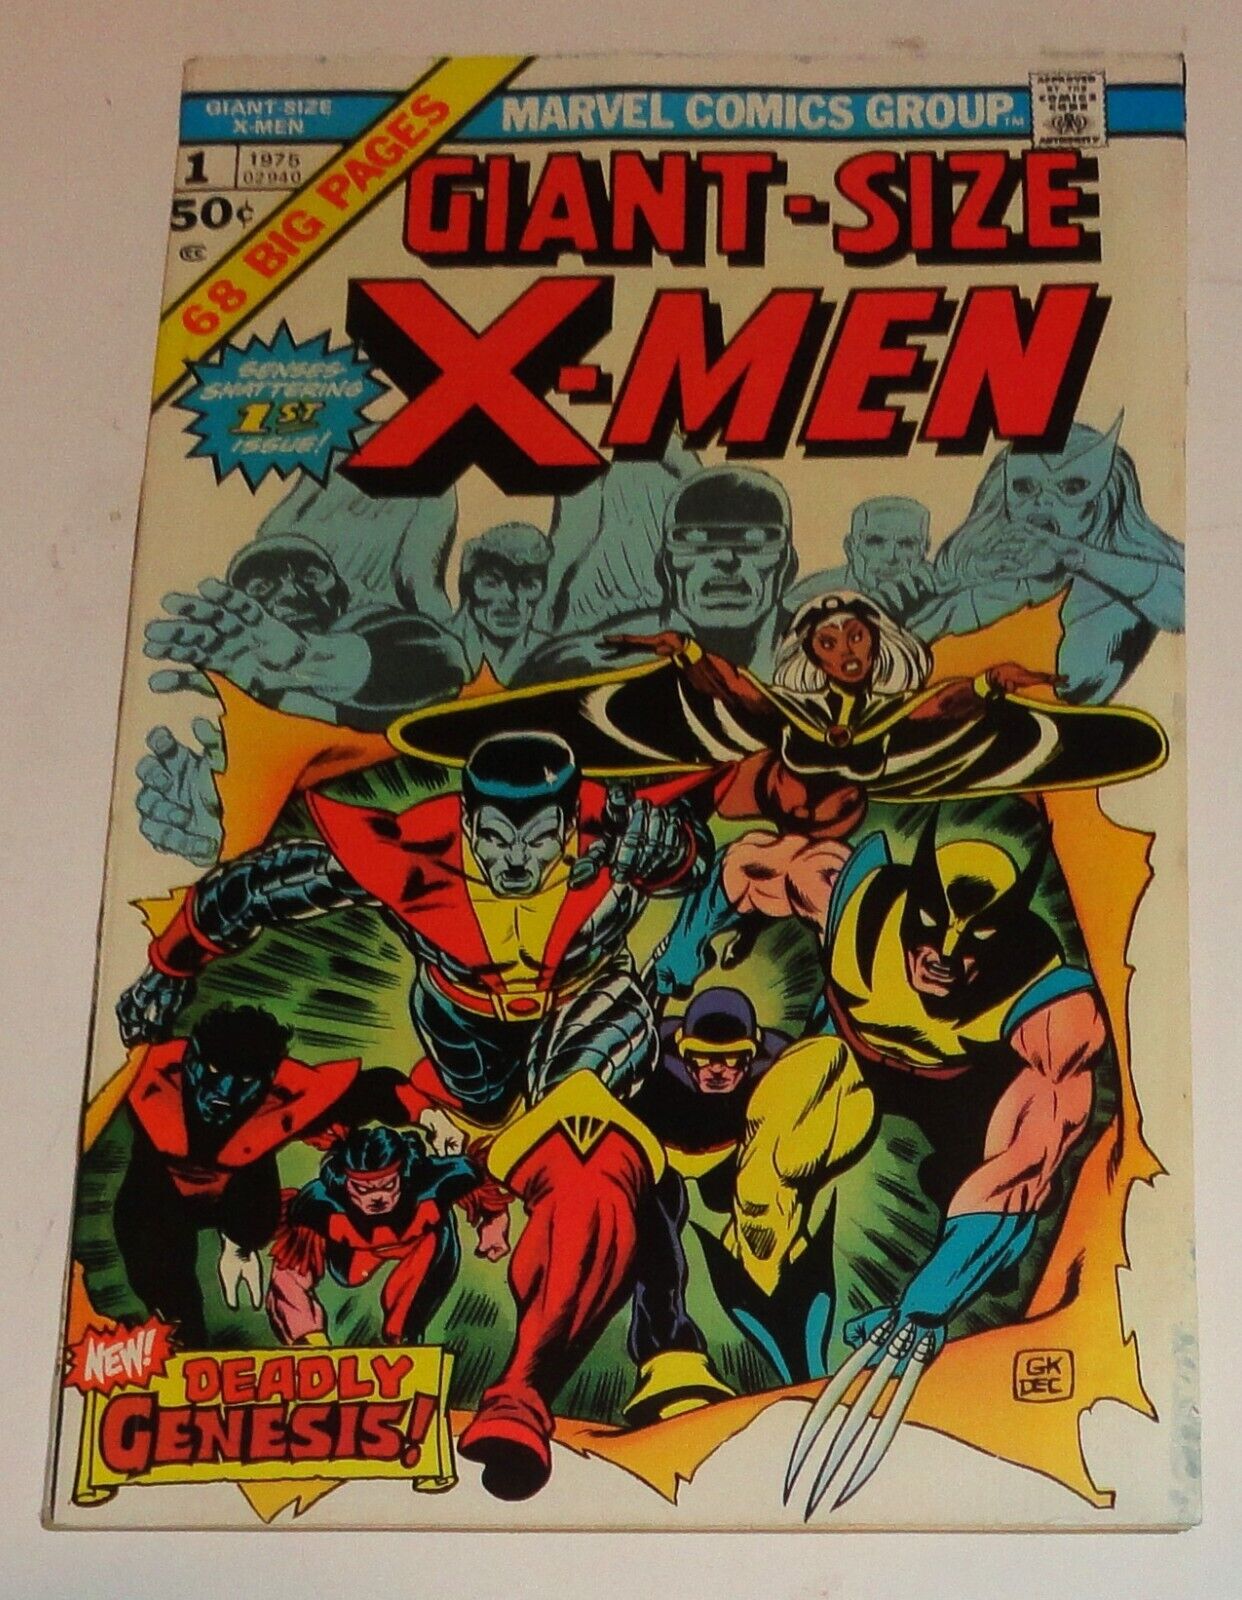 GIANT SIZE X-MEN #1 NICE COPY MAYBE 7.5/8.0 AREA KEY ISSUE WOLVERINE FIRST STORM